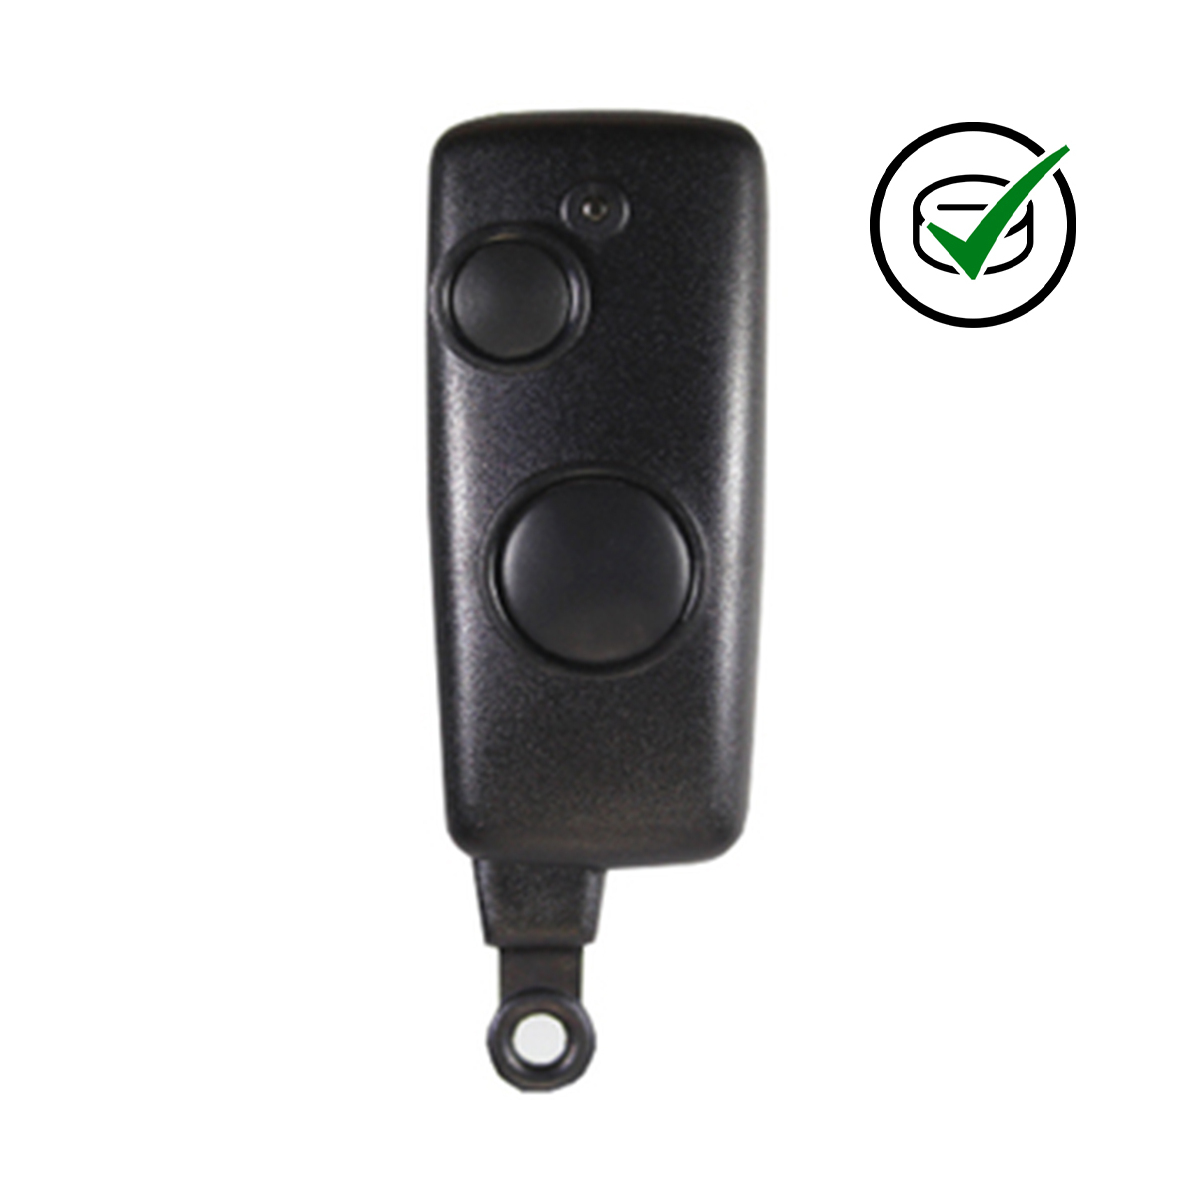 Immobiliser 2 button remote to Suit VAE 318-1600, 1800, 2600, 2700 and VAE 317-650 Rolling Code